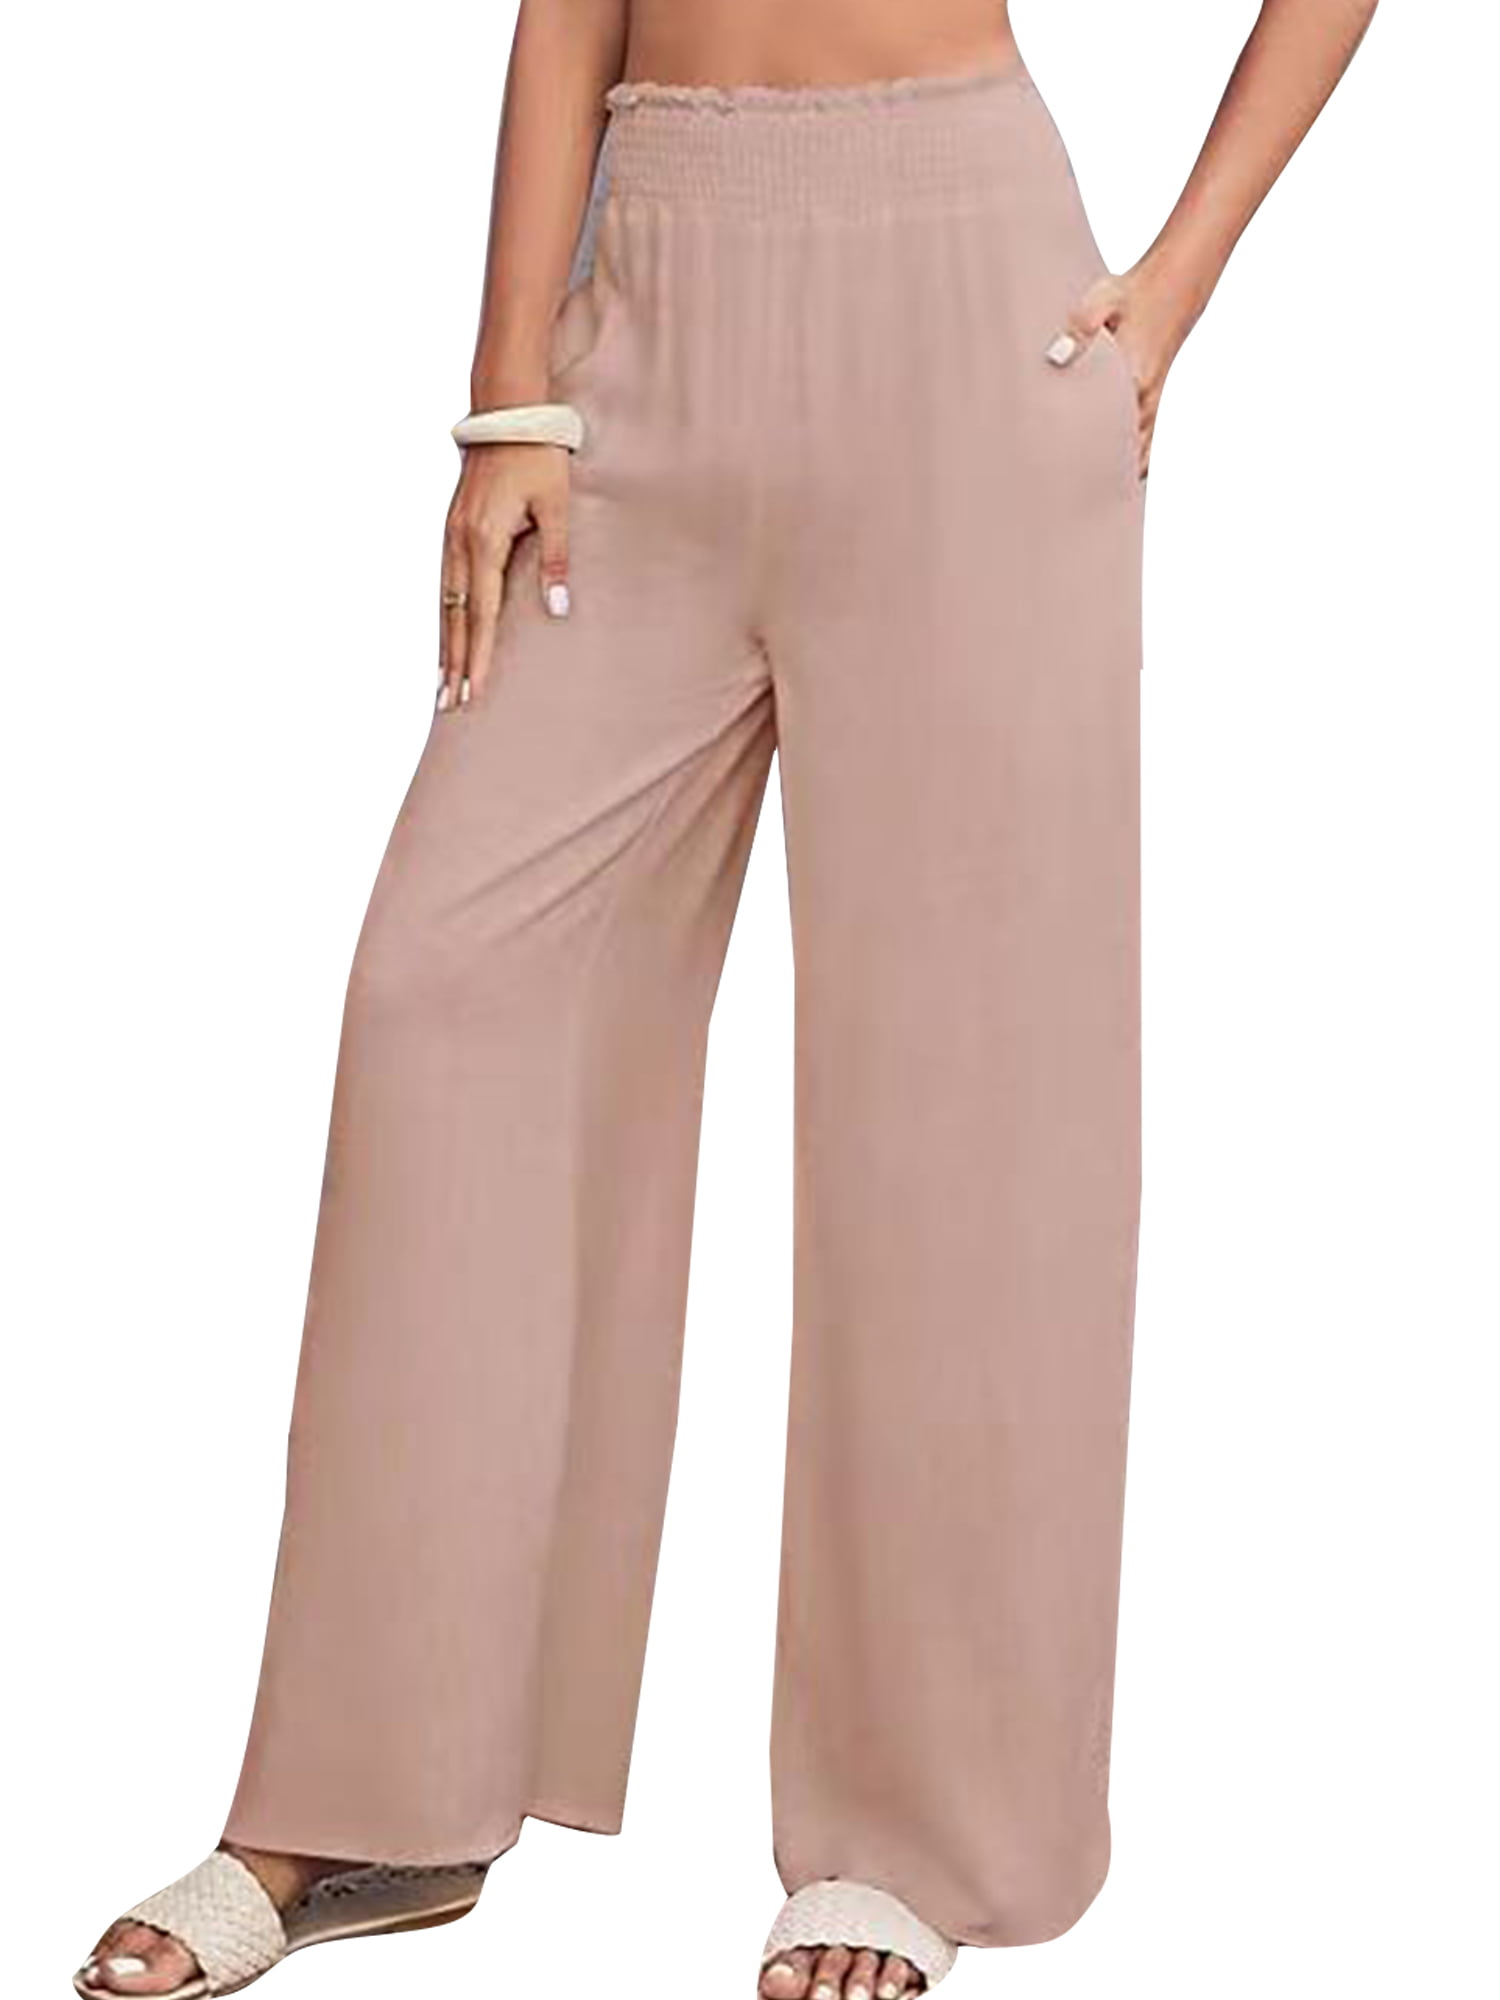 BROLEO Women Wide Leg Pants, Causal Trousers Solid Color Side Pockets  Elastic for Daily Wear (XL) at Amazon Women's Clothing store